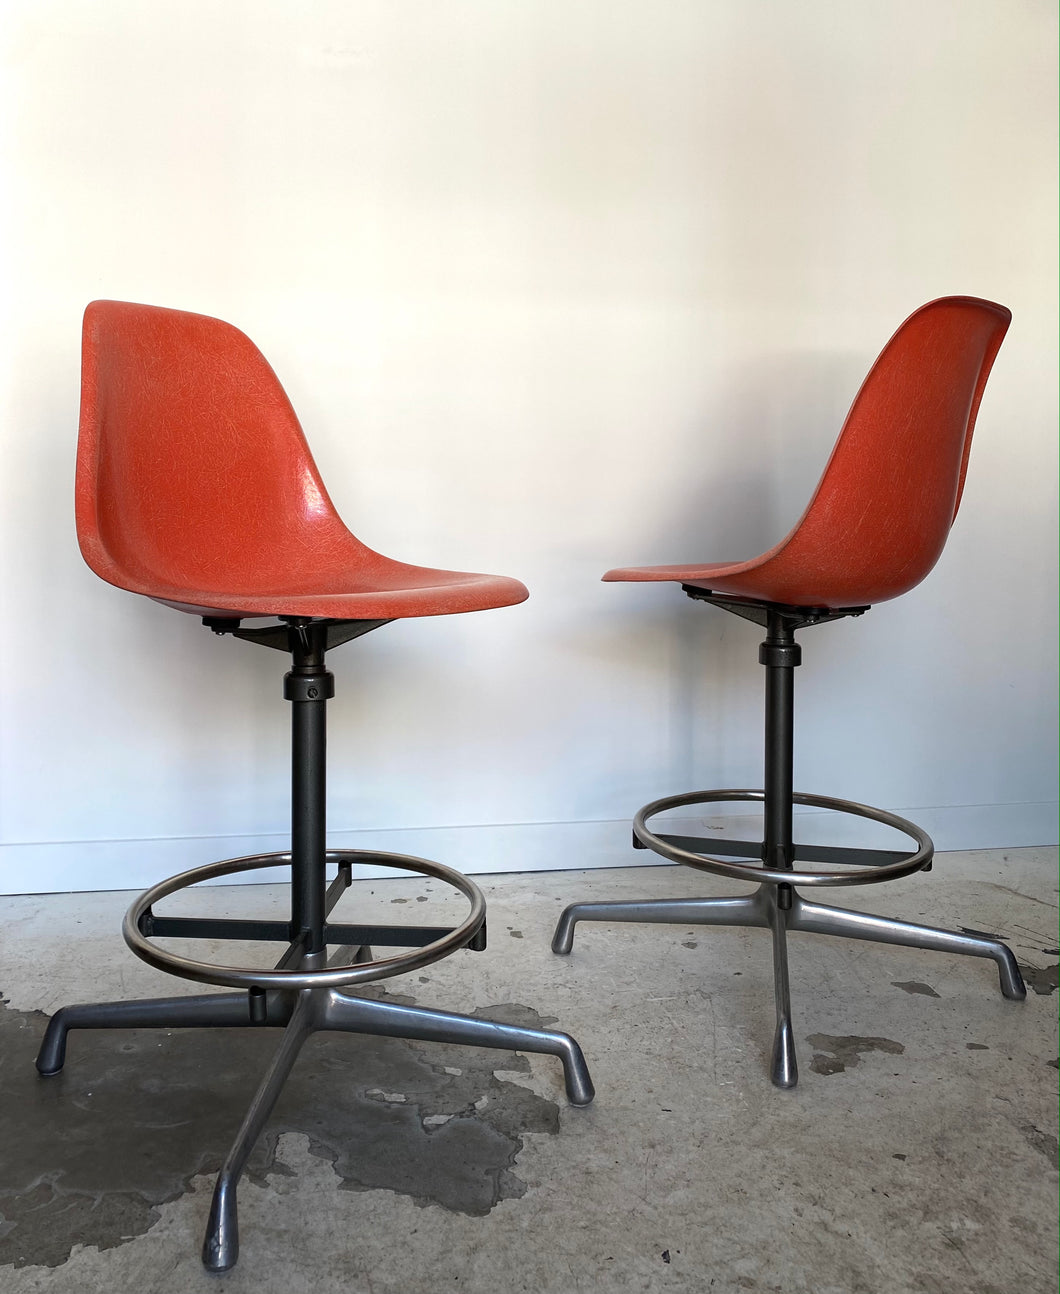 Drafting stools by Charles & Ray Eames for Herman Miller